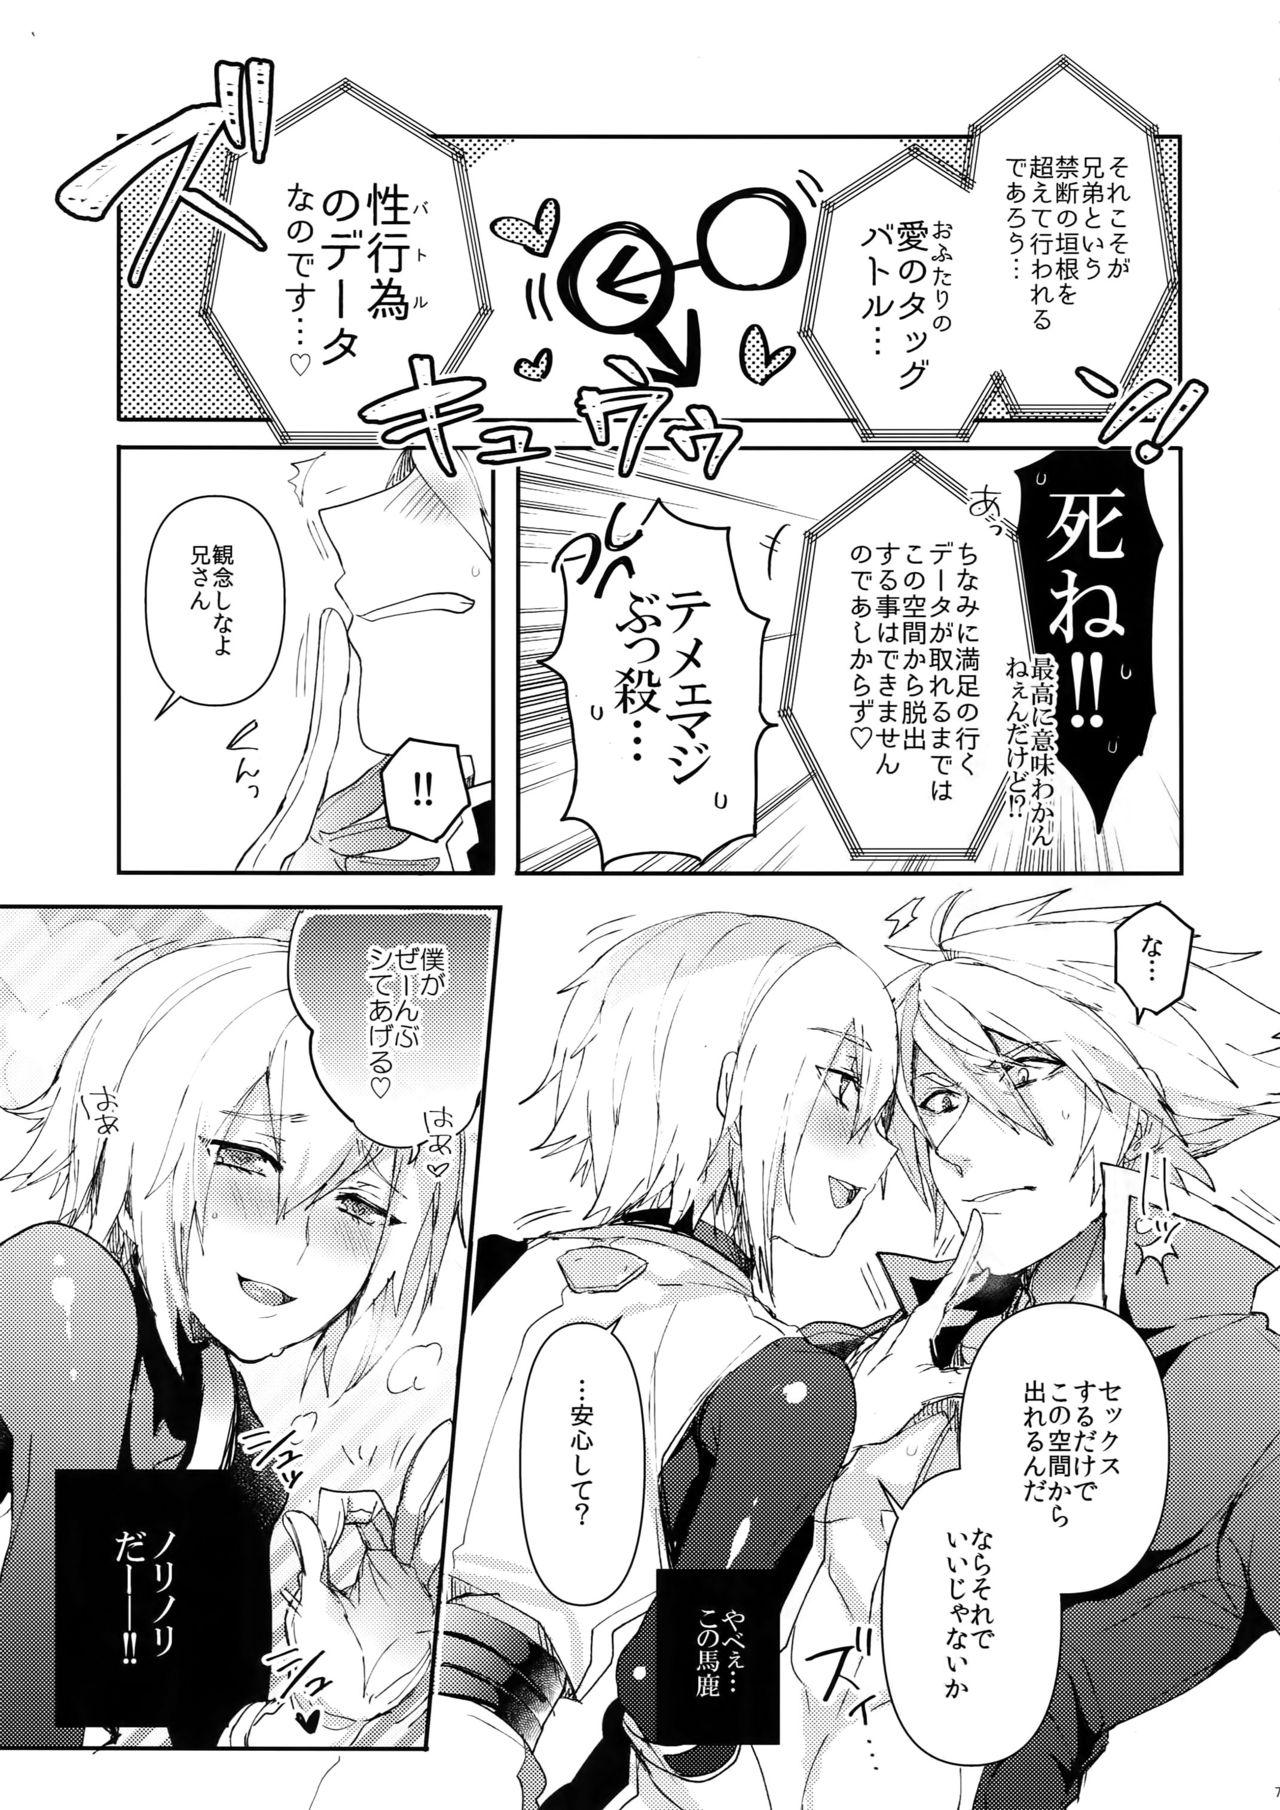 Huge Boobs NORMAL OPERATION - Blazblue Dirty Talk - Page 8